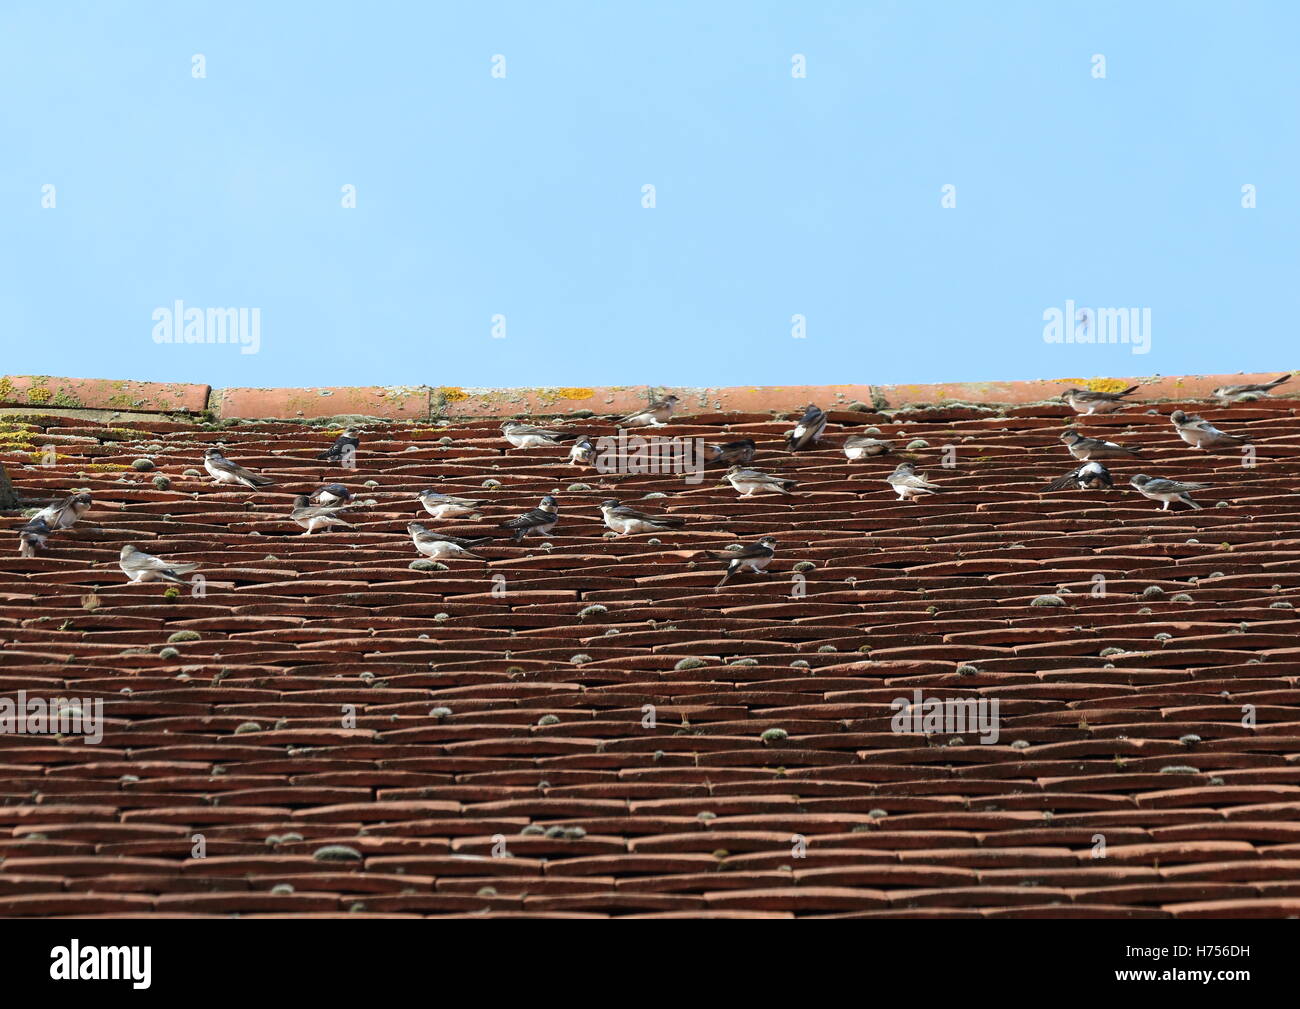 House Martins resting on a tile roof Stock Photo